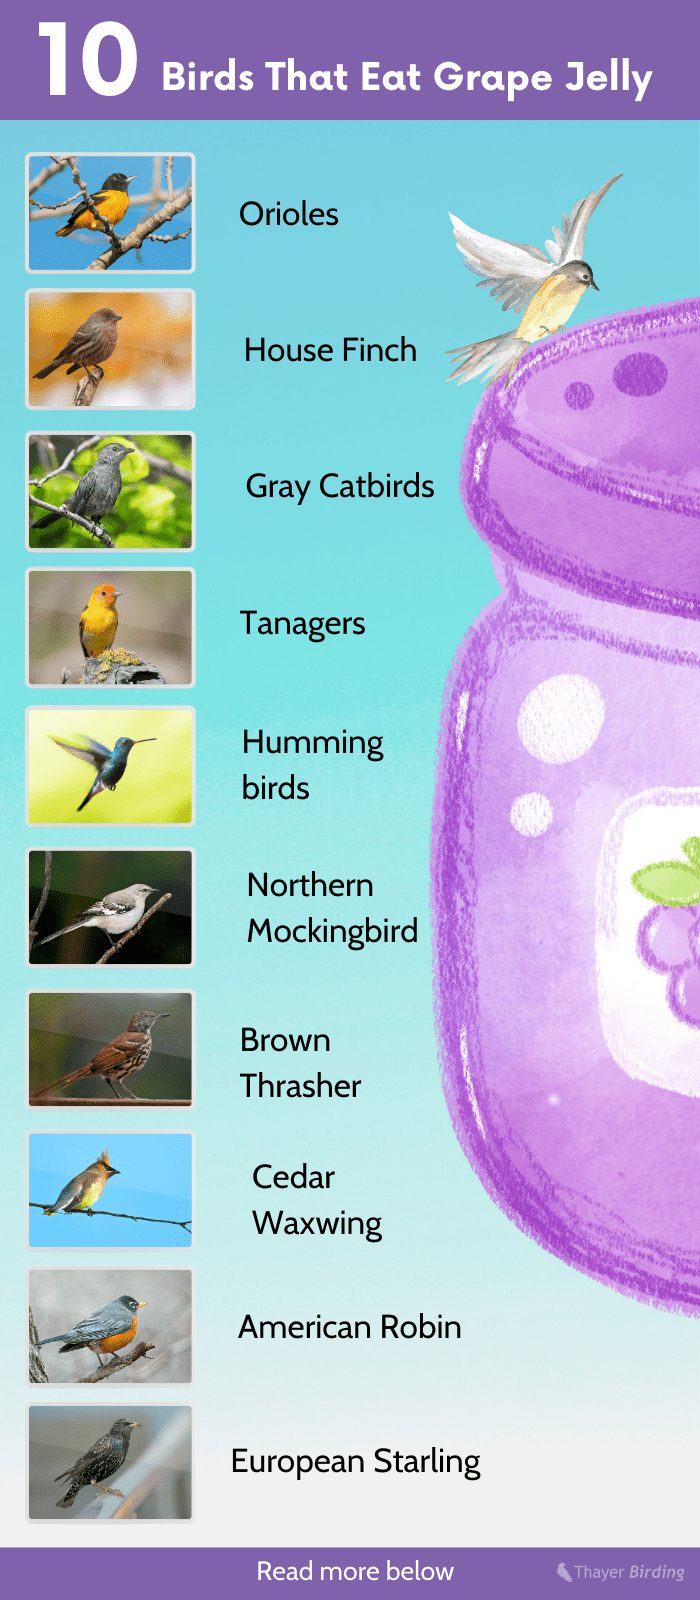 Several bird species enjoy eating grape jelly, including orioles, finches,  catbirds, tanagers, robins, and hummingbirds. – Nature Blog Network